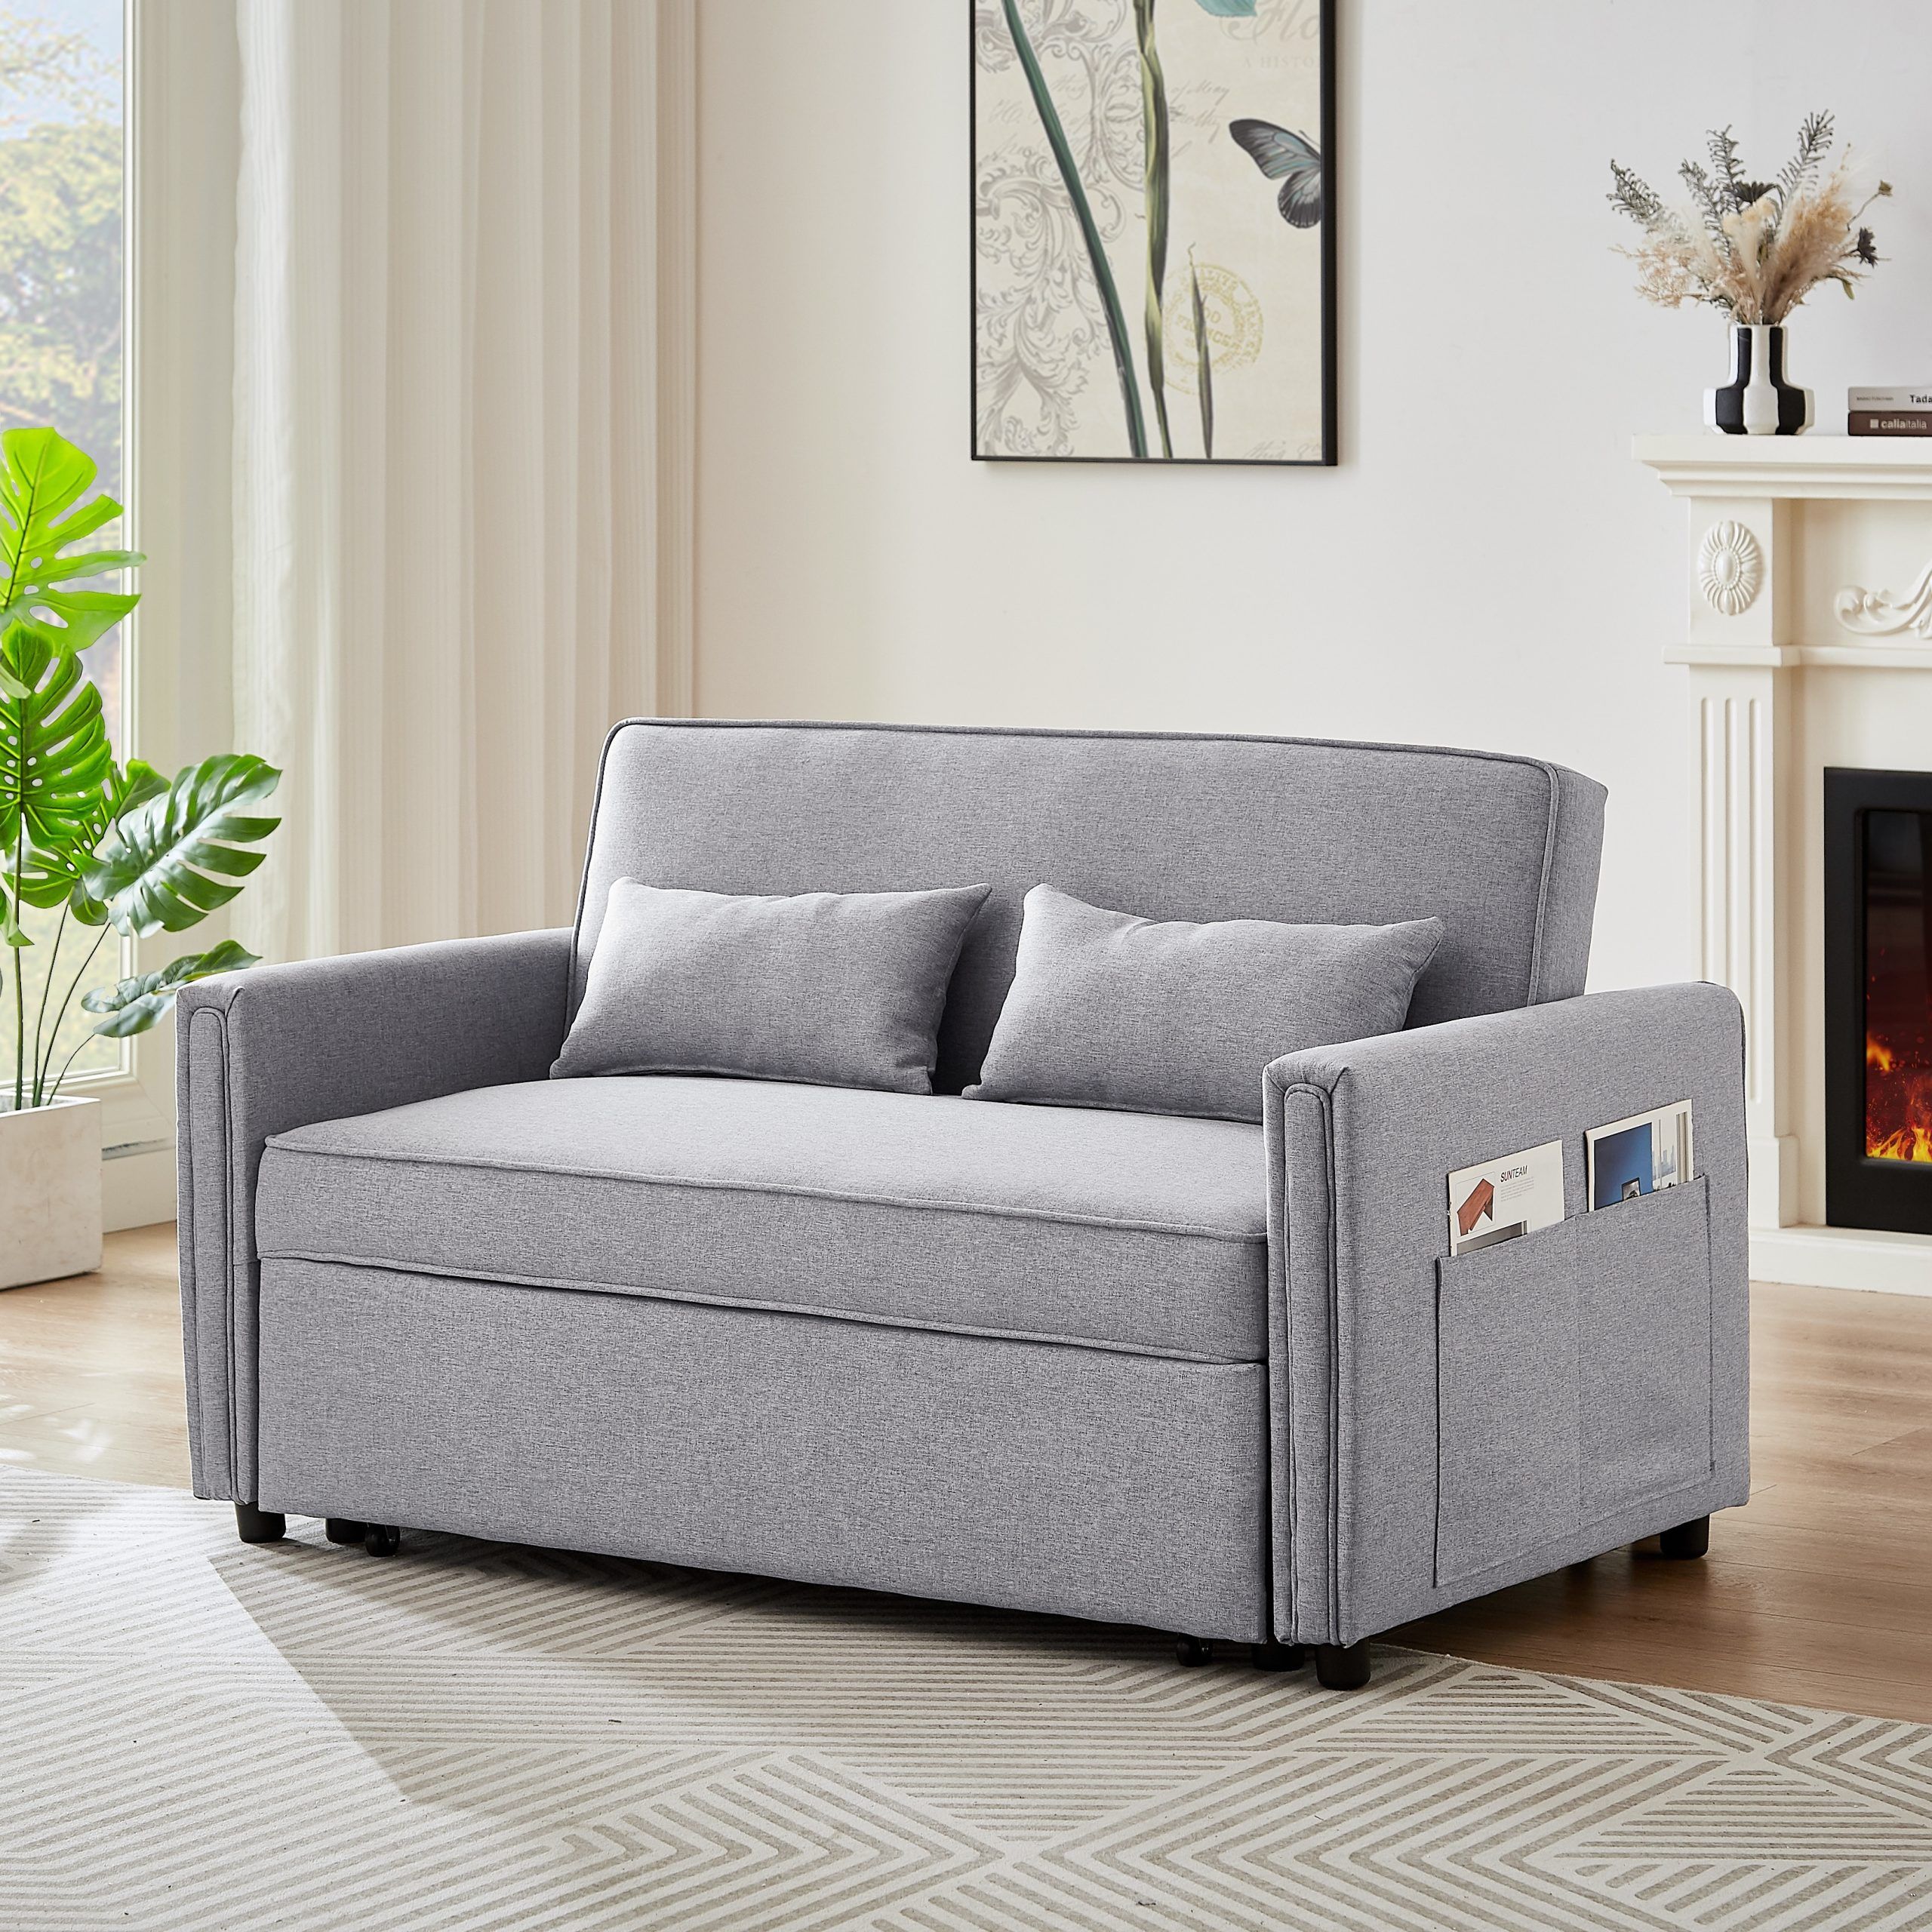 Modern Linen Convertible Loveseat Sleeper Sofa Couch With Adjustable  Backrest, Pull Out Bed And 2 Lumbar Pillows, Grey – Bed Bath & Beyond –  38373427 For Convertible Gray Loveseat Sleepers (View 4 of 15)